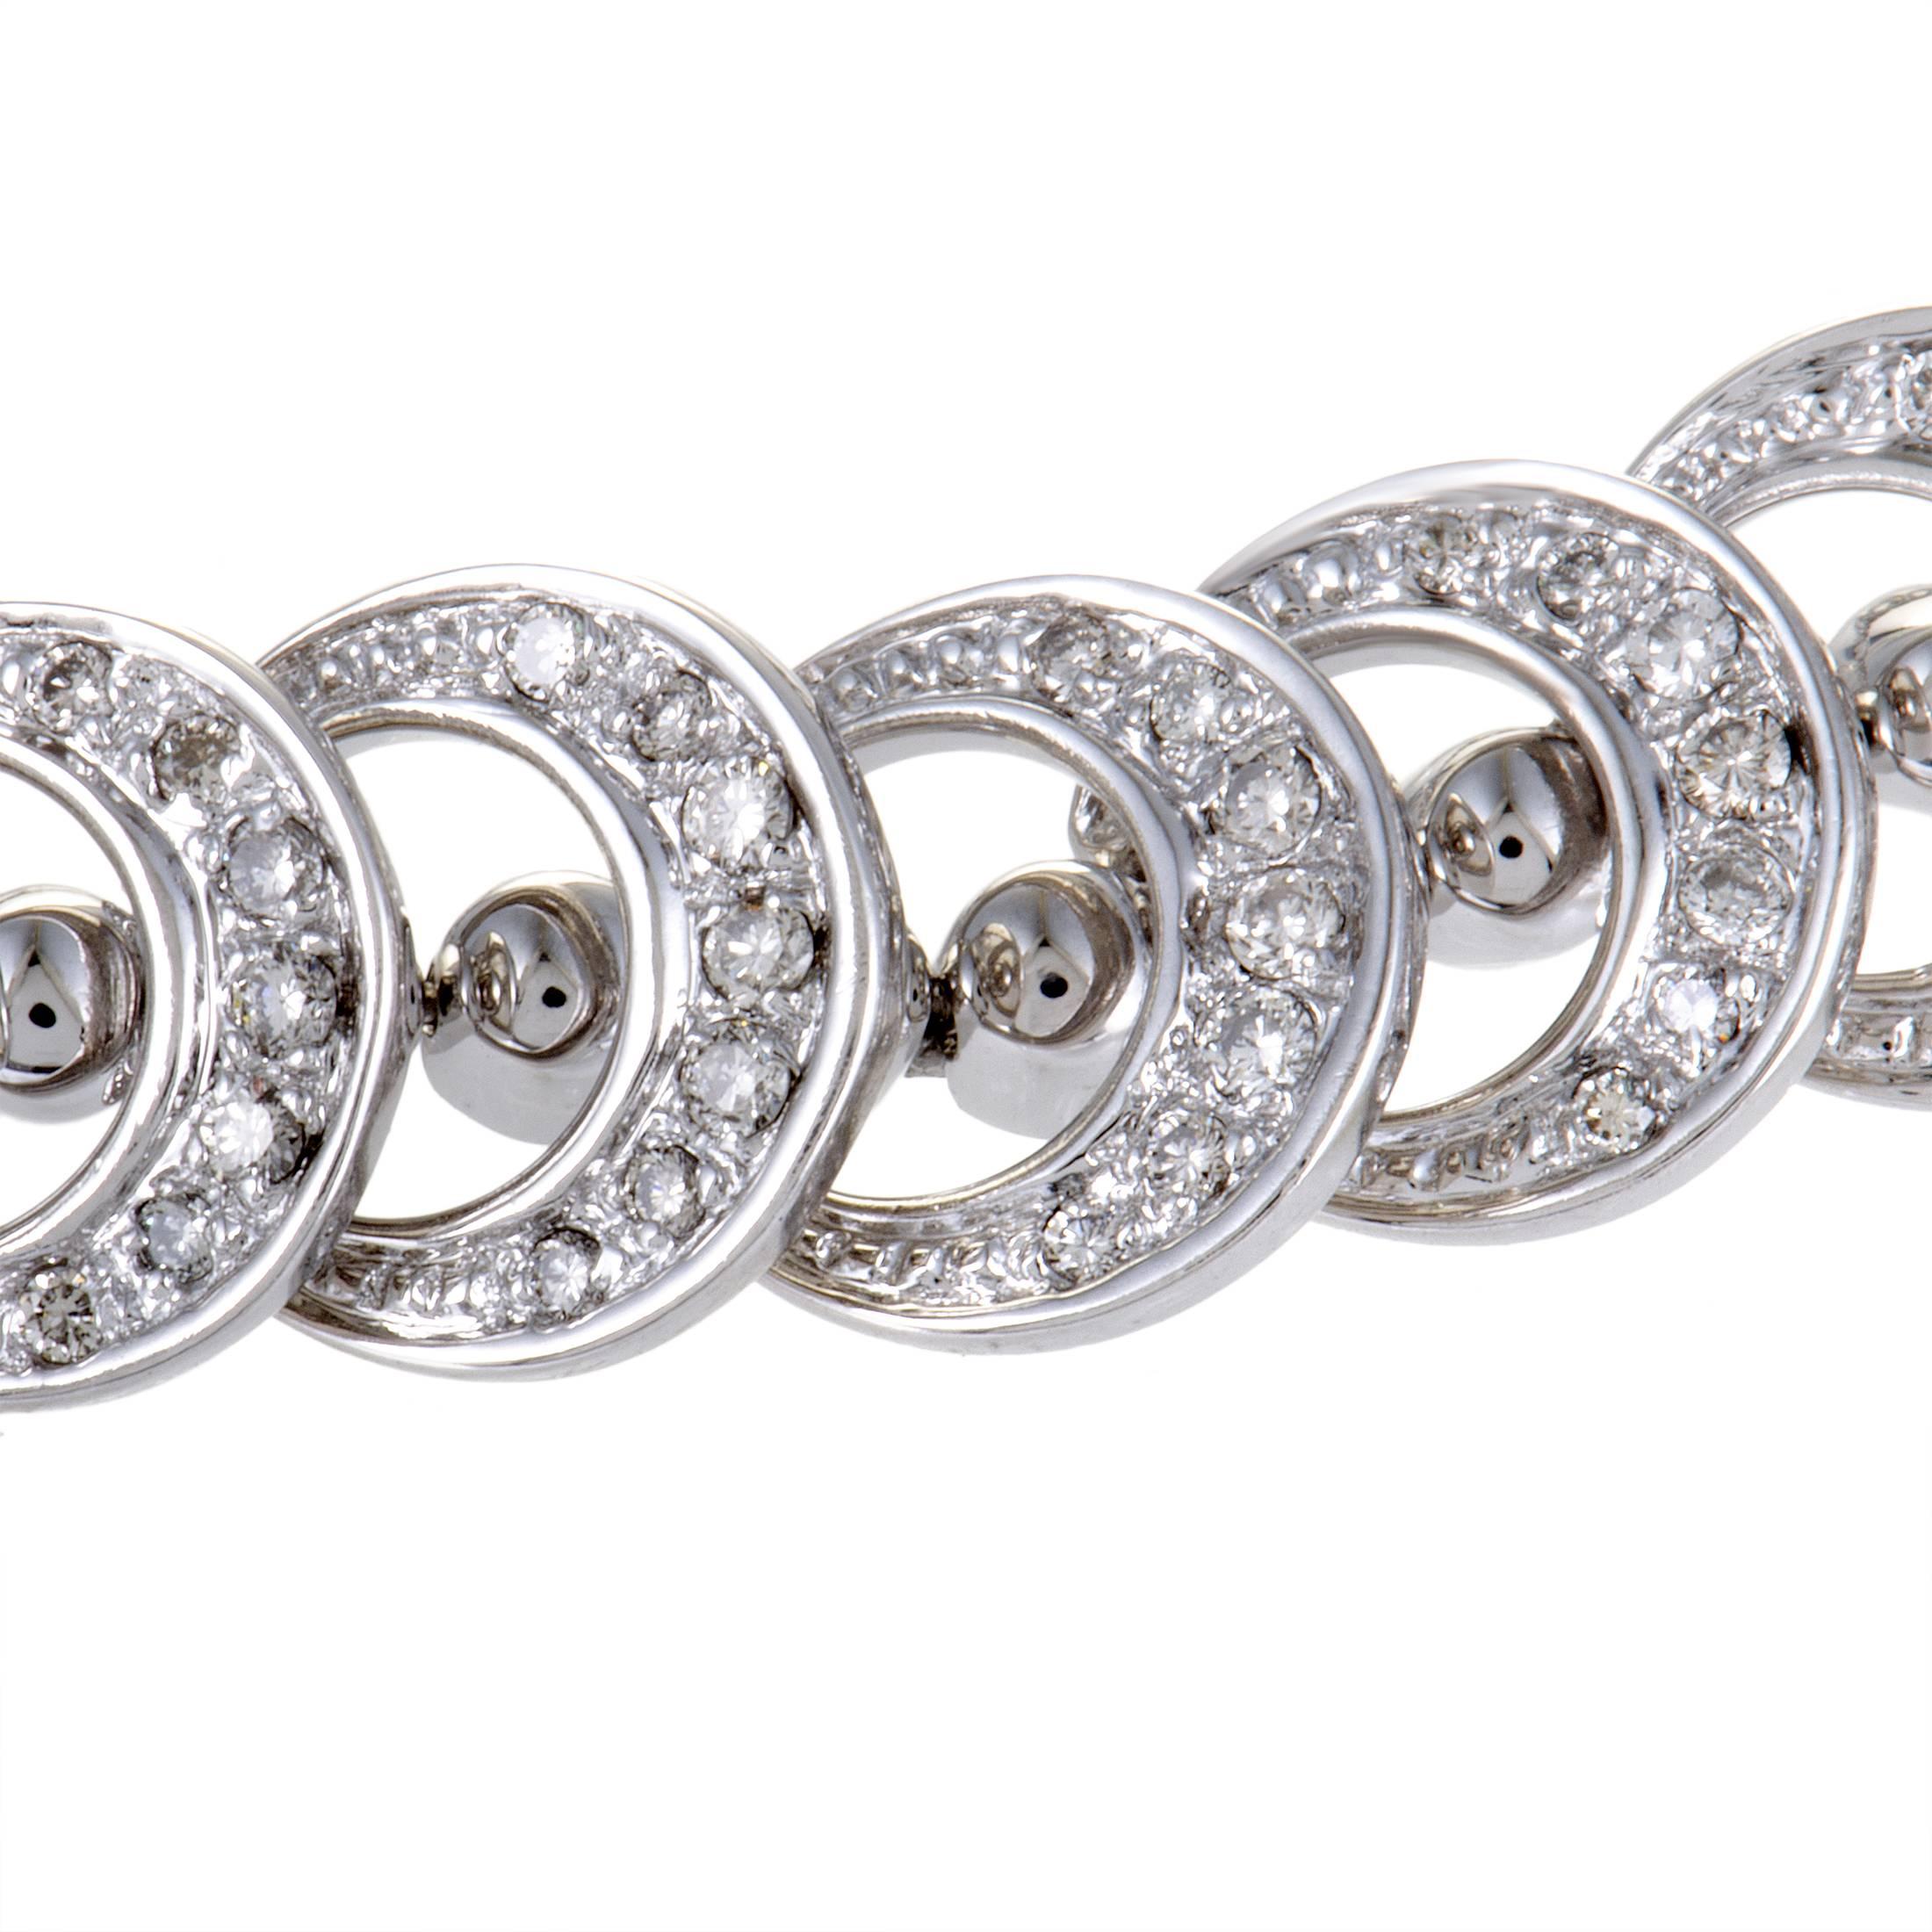 An incredibly imaginative design graces this stunning bracelet made of 18K white gold that offers an alluringly prestigious appearance. The bracelet is generously set with resplendent diamond stones that weigh in total 2.00 carats.
